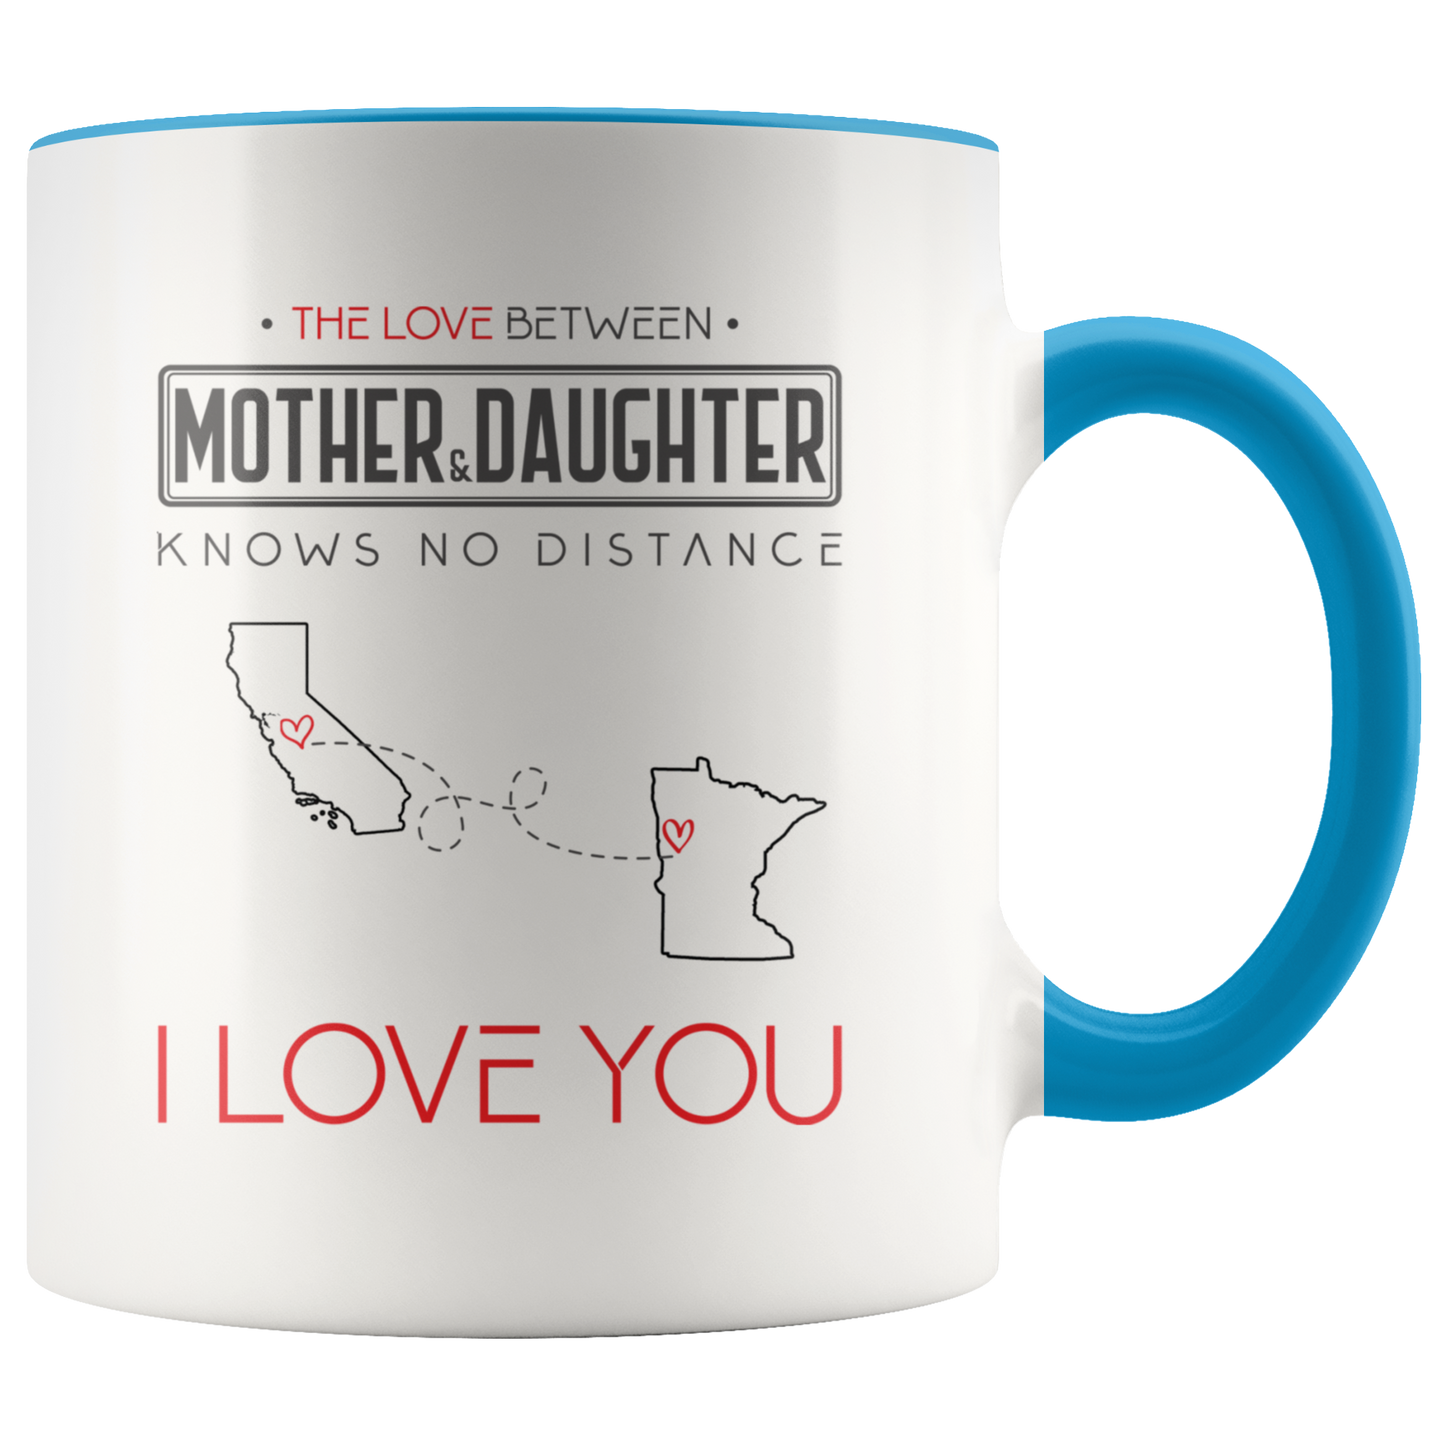 ND20430710-sp-25808 - [ California | Minnesota | Mother And Daughter ] (CC_Accent_Mug_) Personalized Christmas Mug Long Distance Gift For Mom, Dad -